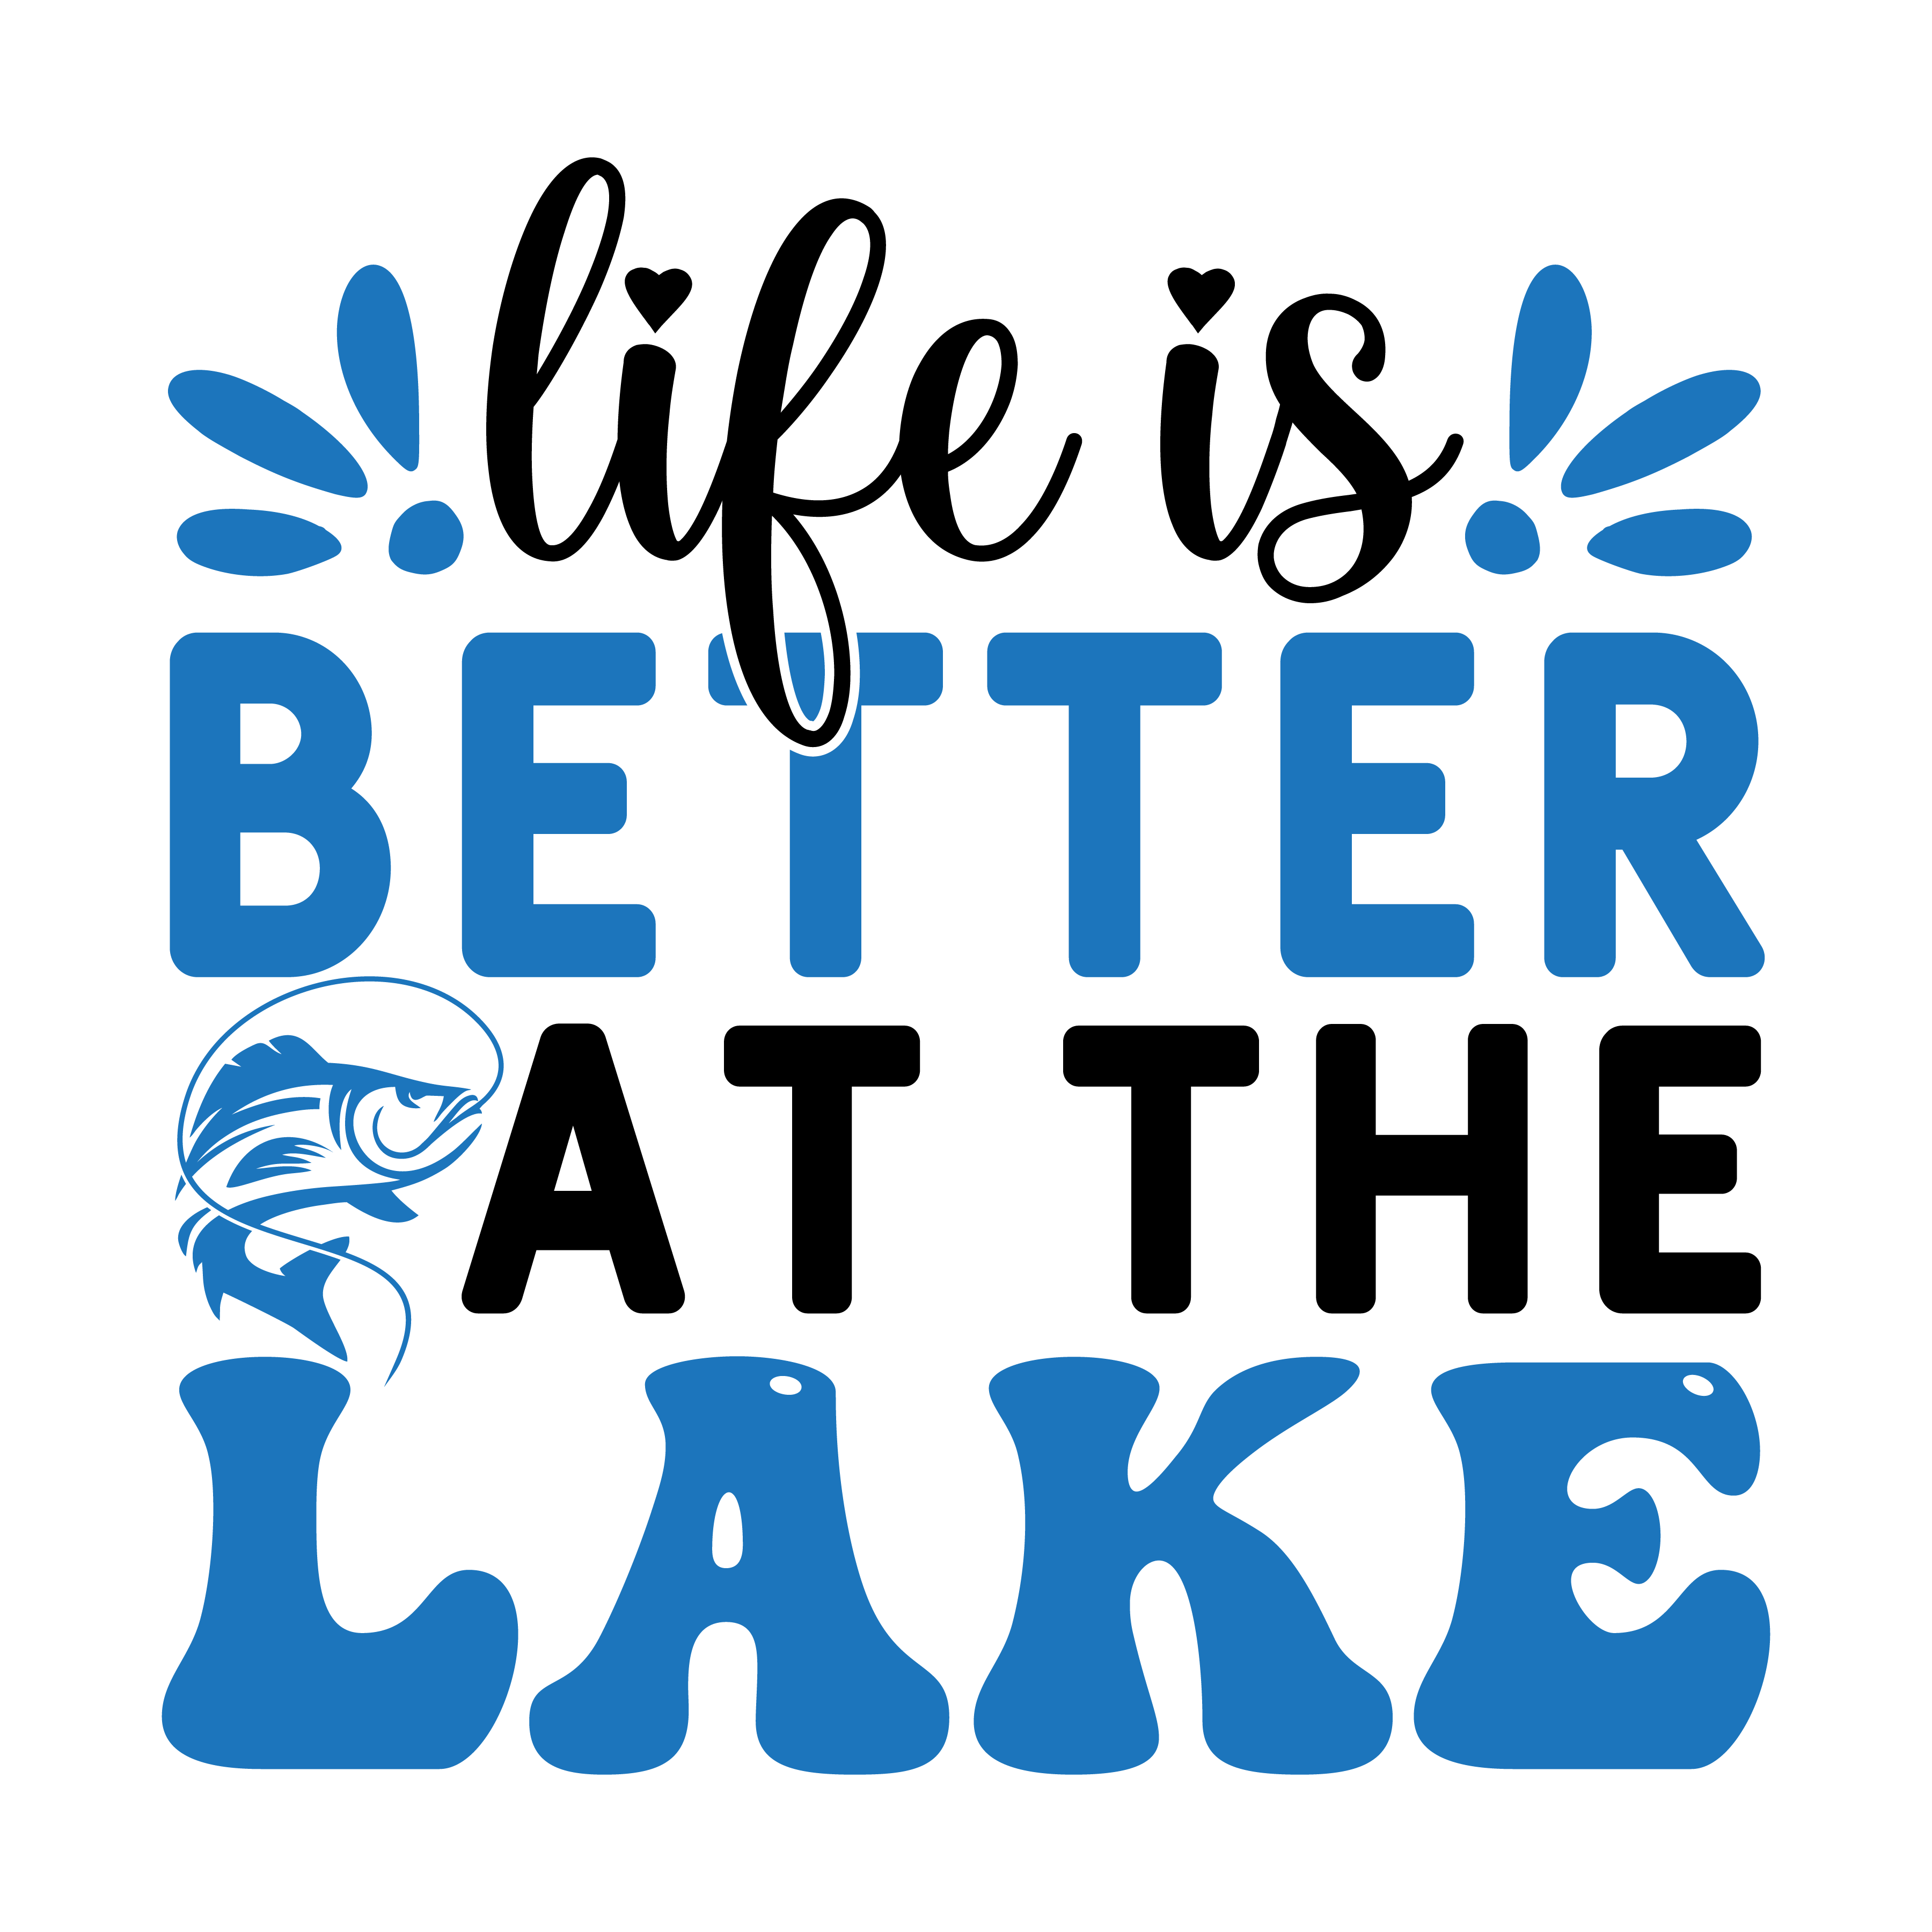 life is better at the lake, Fishing quotes, fishing sayings, Cricut designs, free, clip art, svg file, template, pattern, stencil, silhouette, cut file, design space, short, funny, shirt, cup, DIY crafts and projects, embroidery